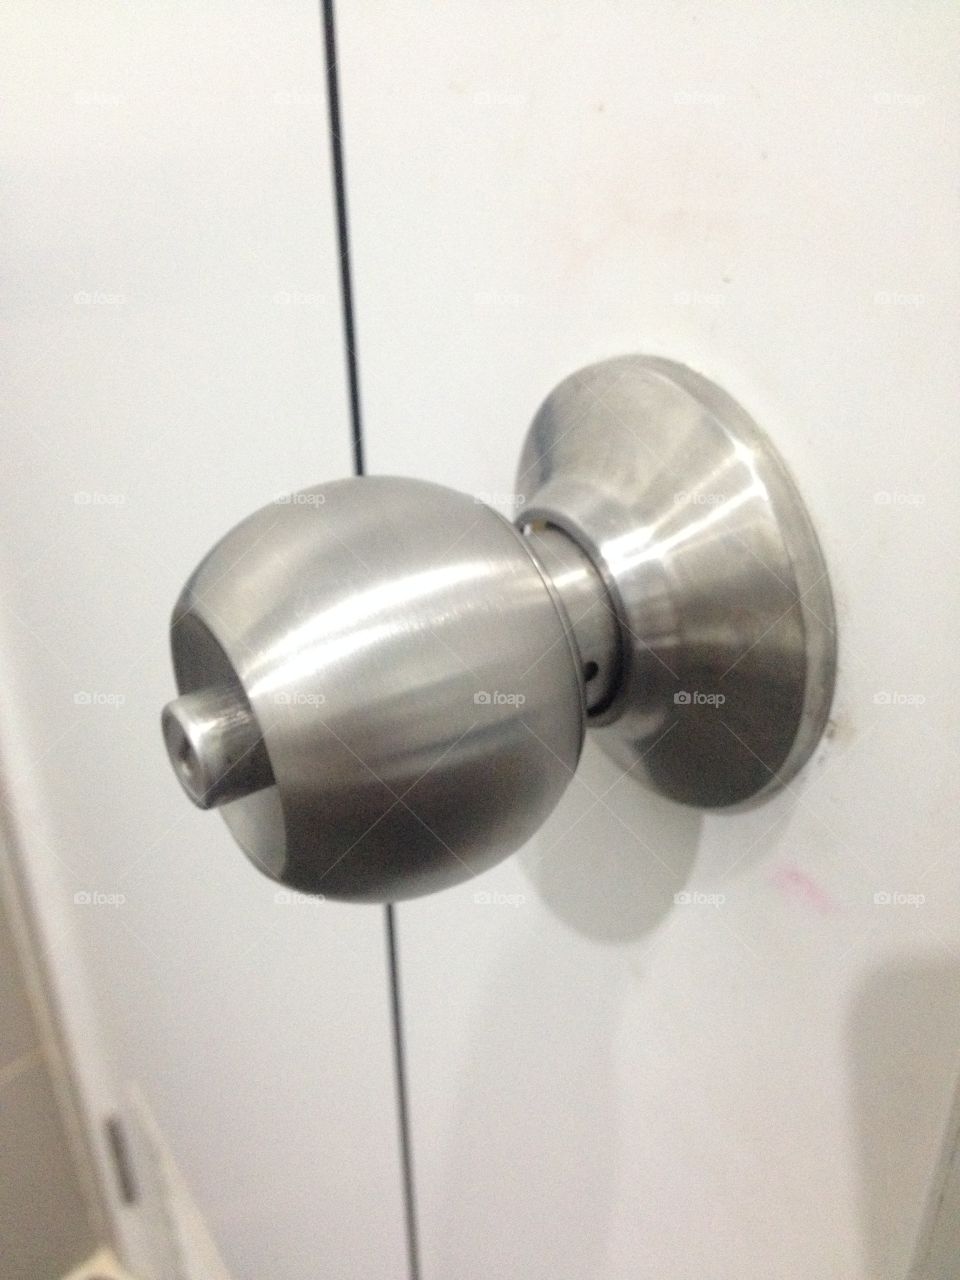 Stainless steel knob and white bath room door.